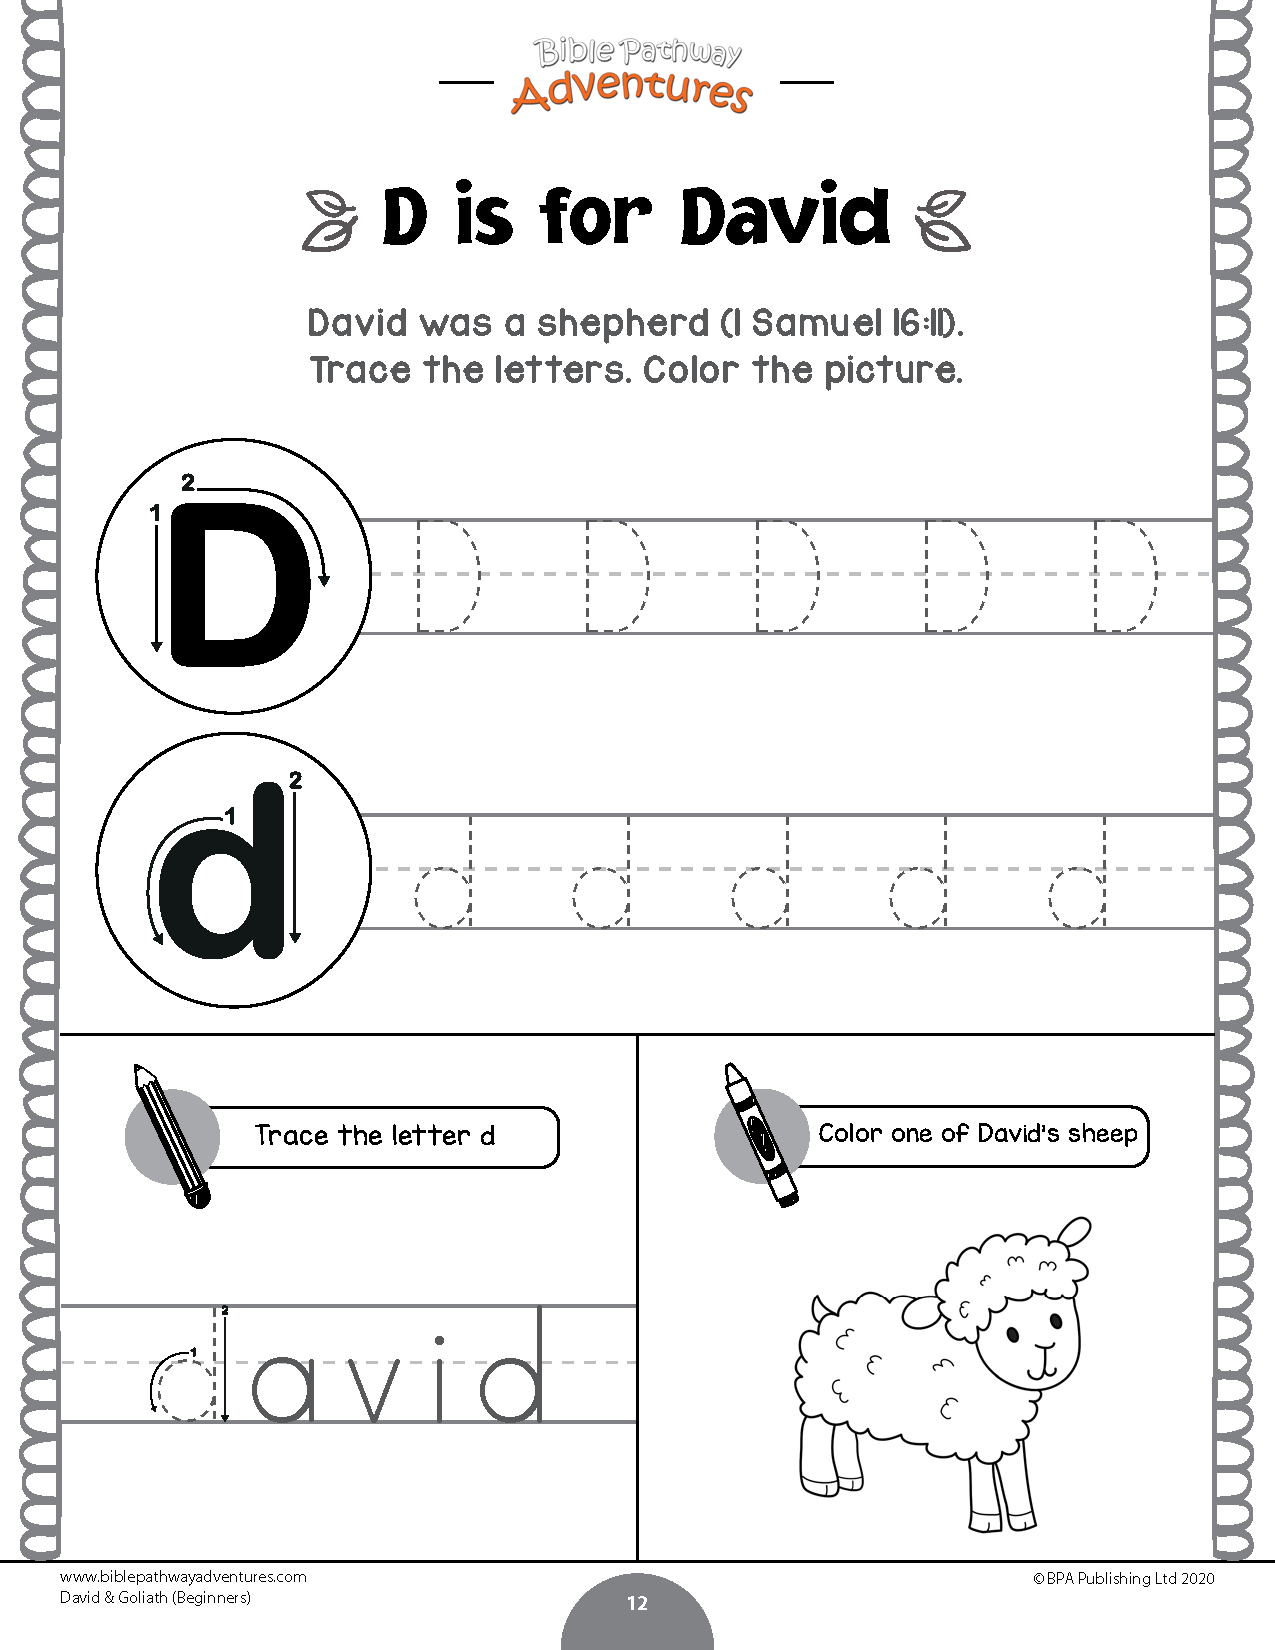 David and Goliath Activity Book for Beginners (PDF)